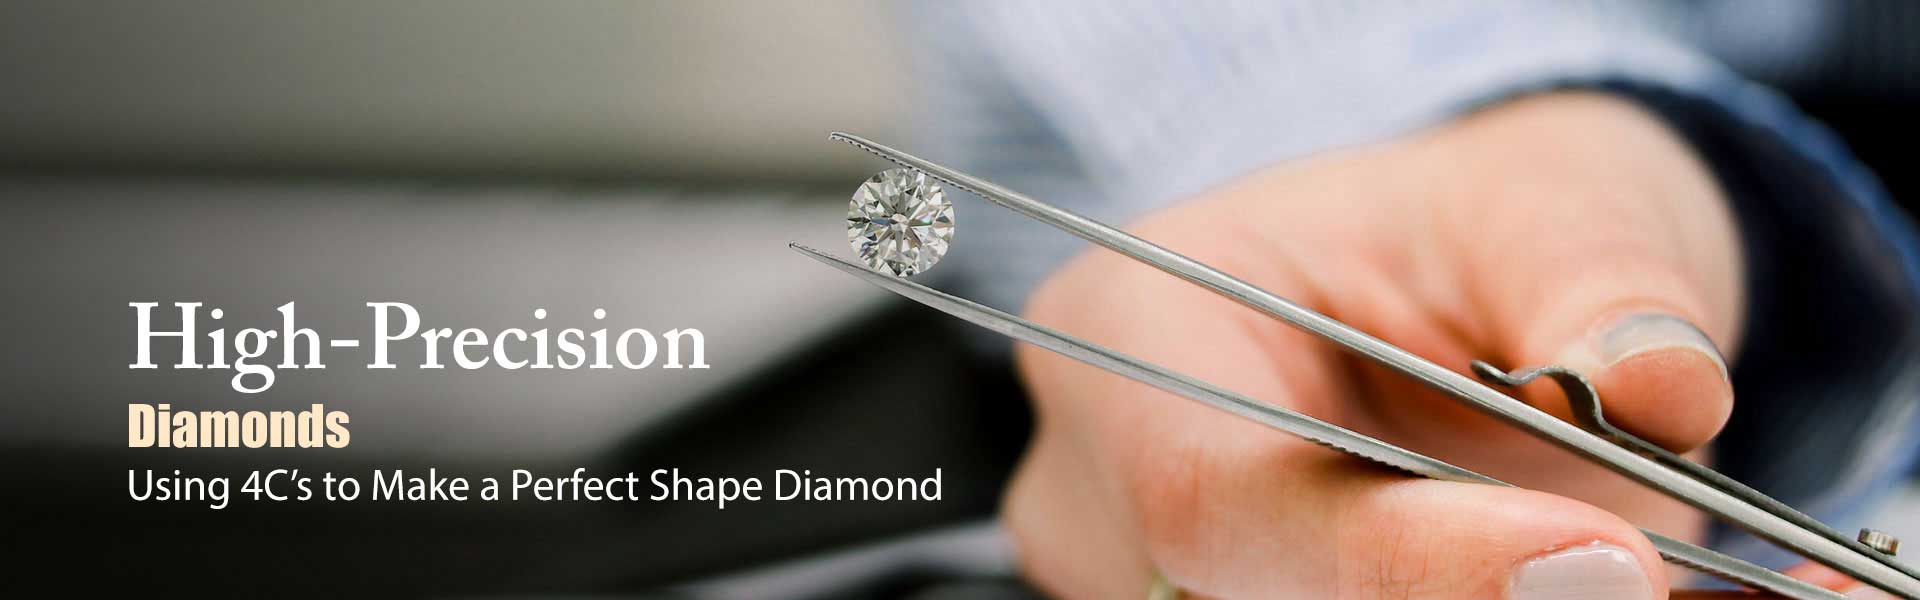  Certified Diamond  Manufacturers in Chicago